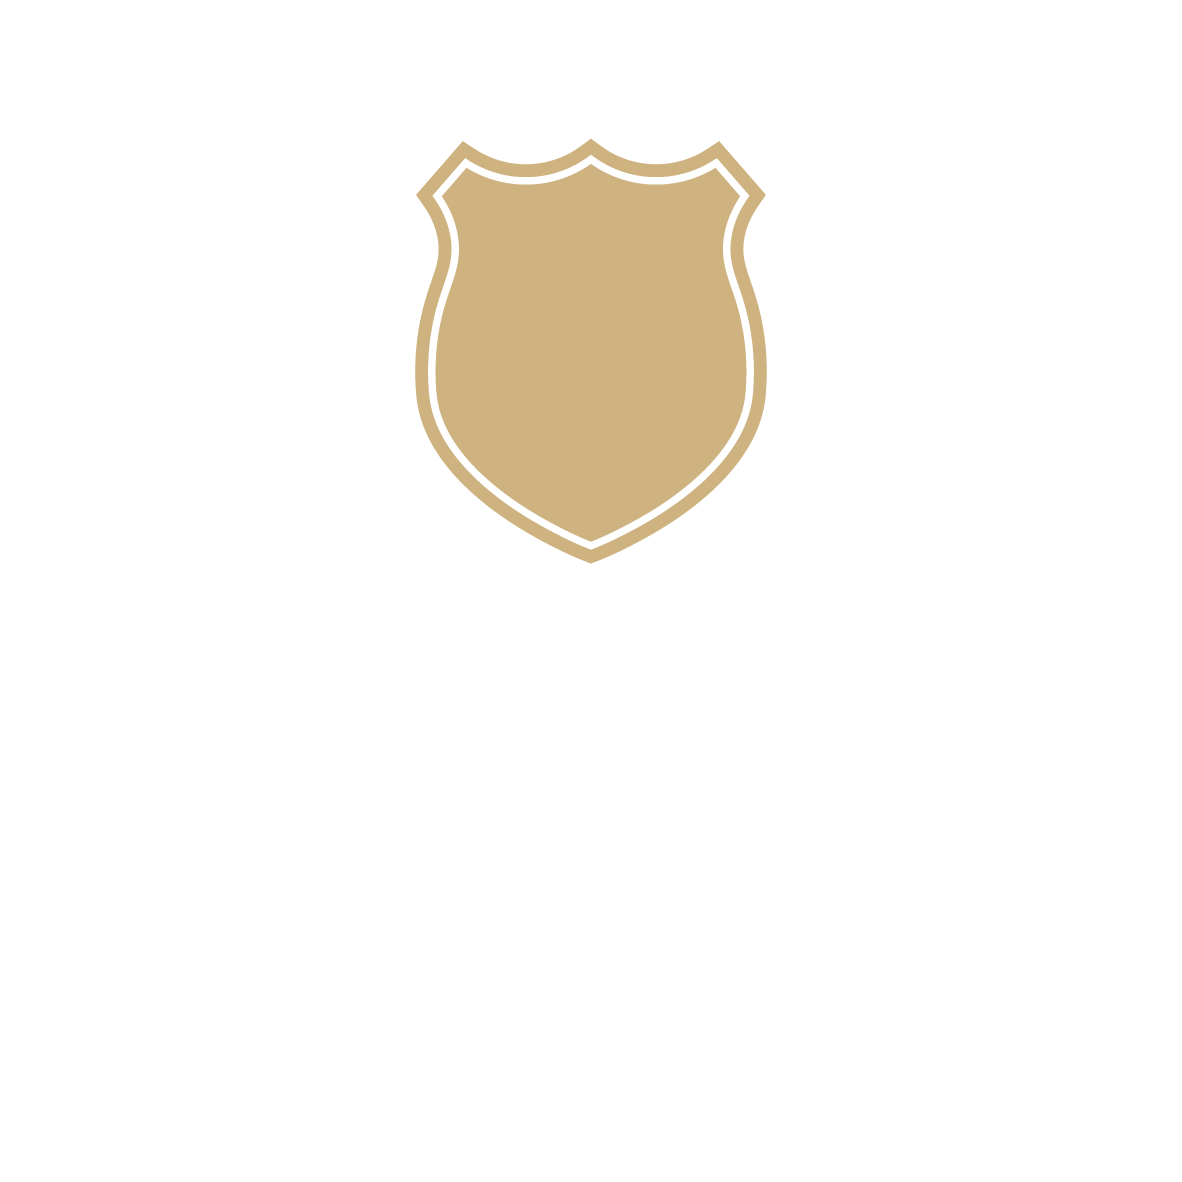 The Cotswold Assistant